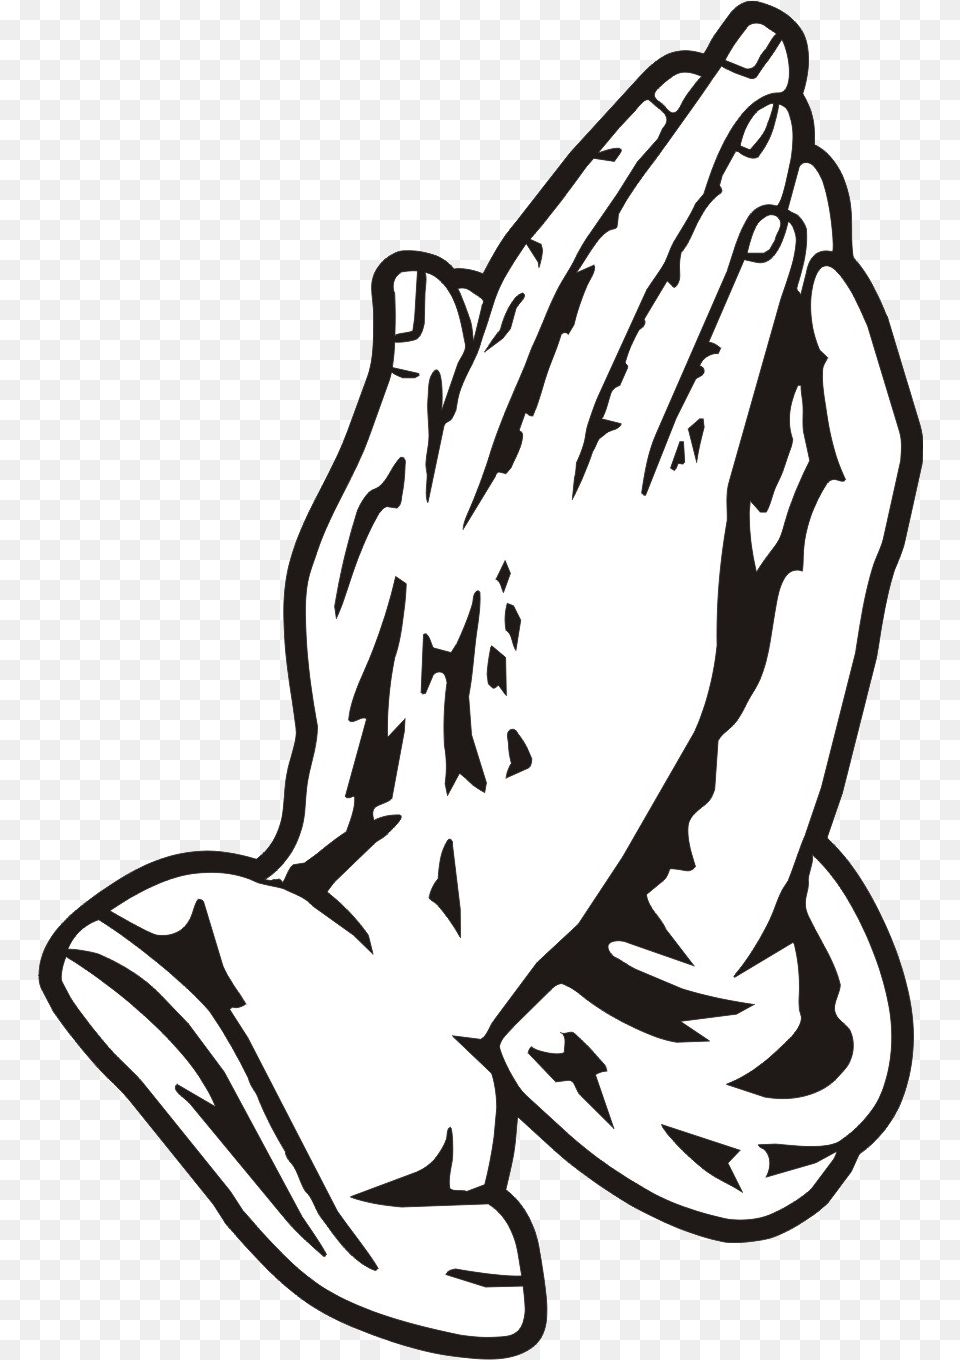 Praying Hands Images Praying Hands Black And White, Clothing, Glove, Stencil, Person Png Image